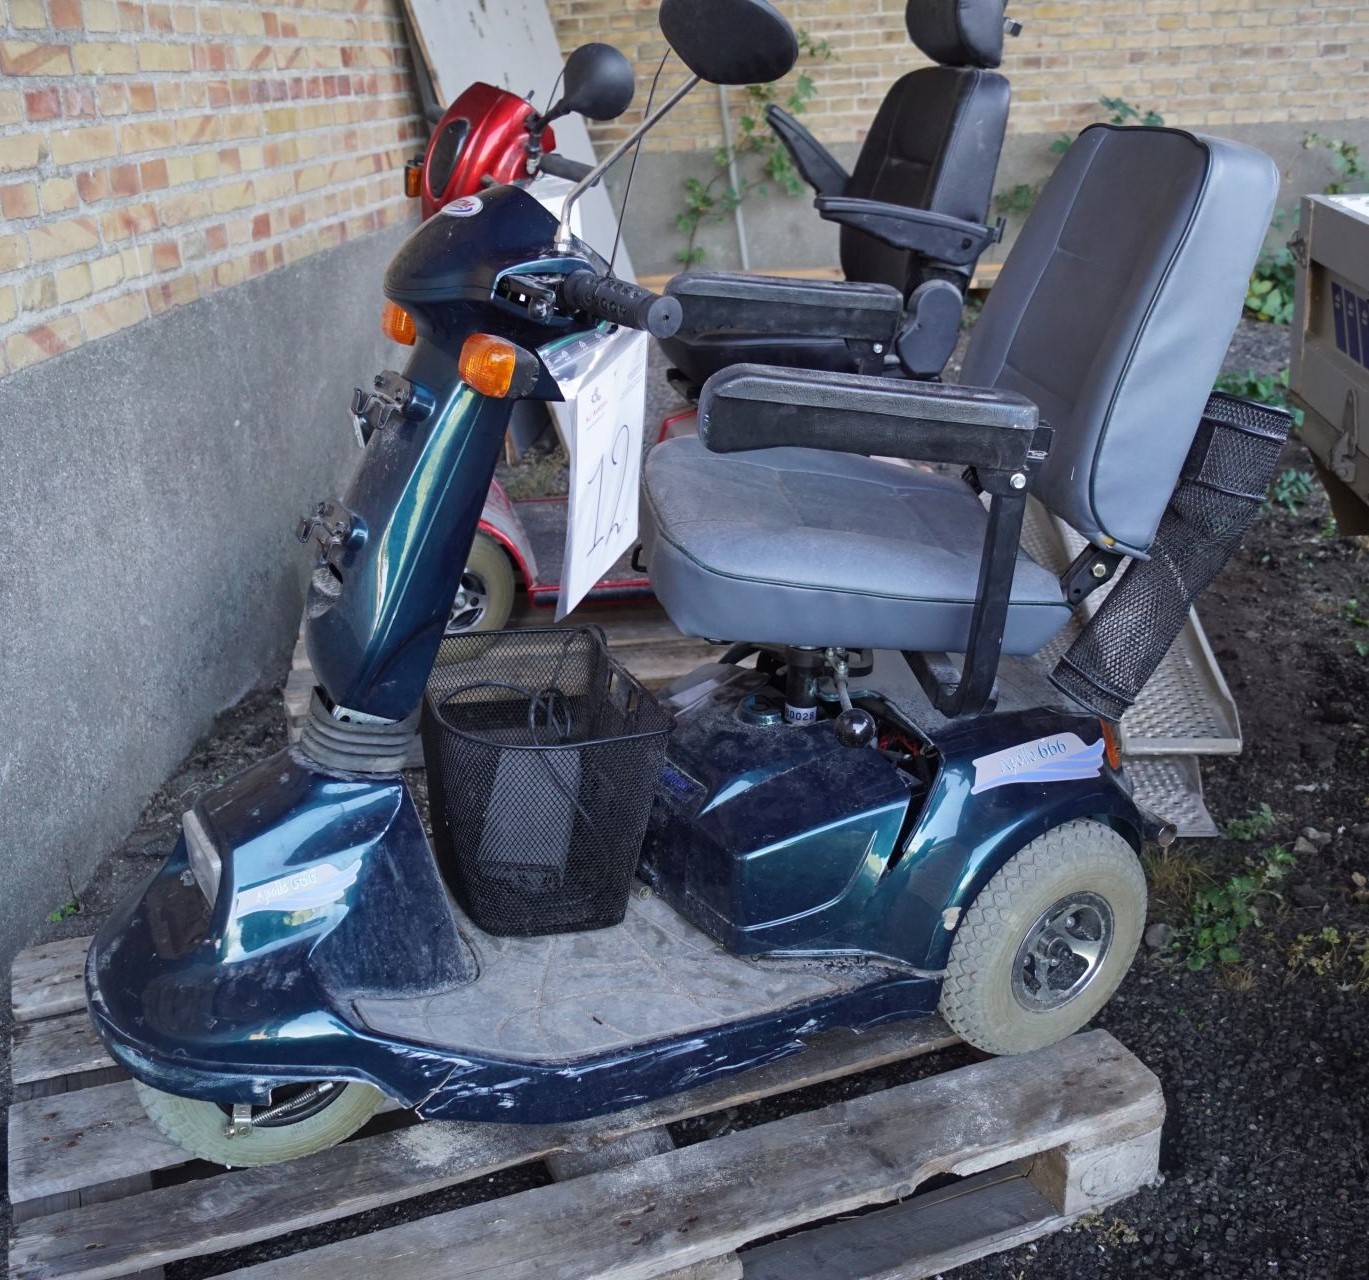 Three-wheeled electric moped with not tested, mark Apollo 666 KJ Auktion - Machine auctions